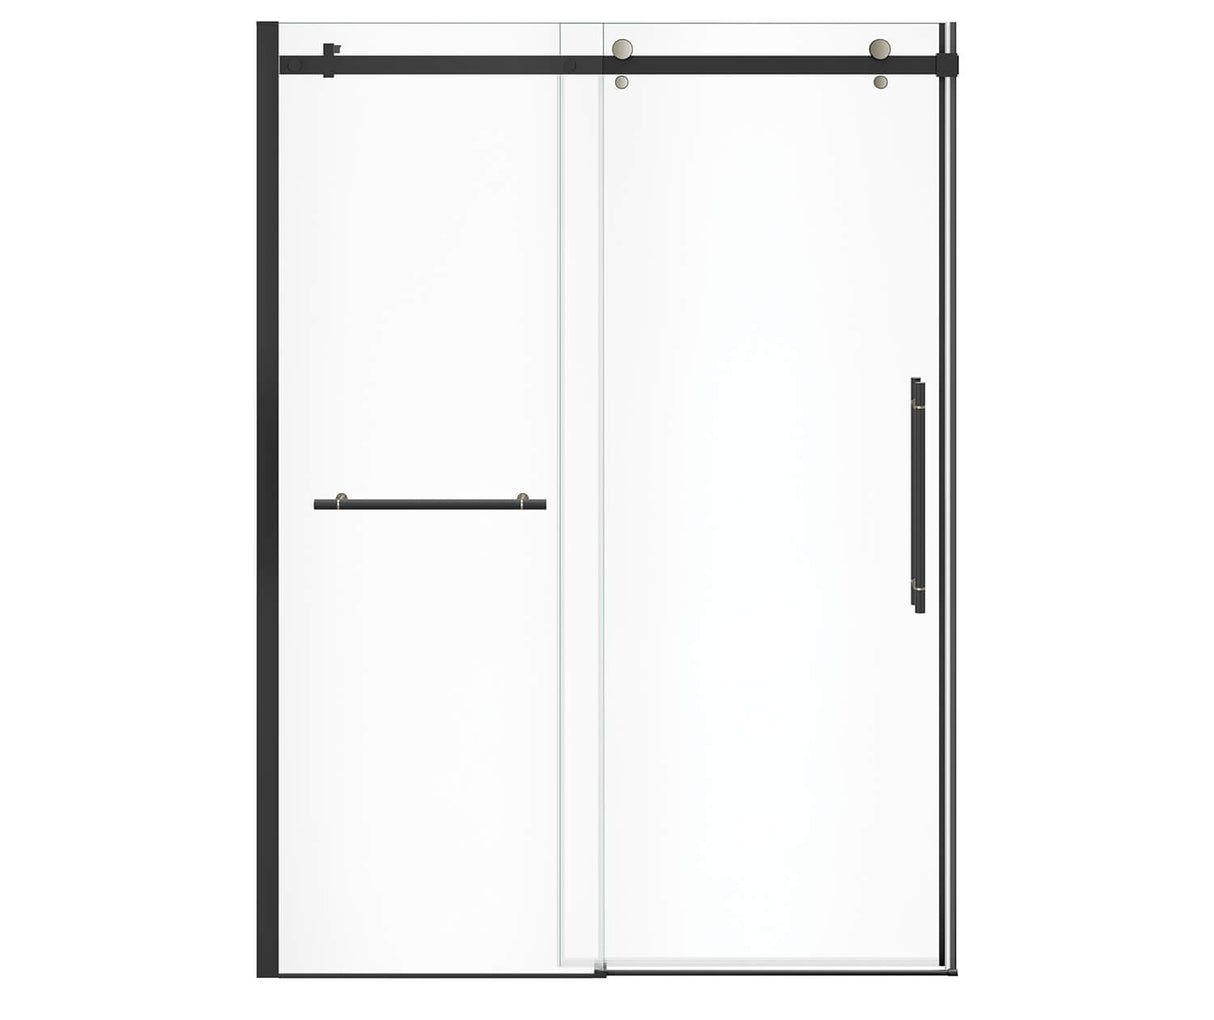 MAAX 138475-900-370-000 Vela 56 ½-59 x 78 ¾ in. 8mm Sliding Shower Door with Towel Bar for Alcove Installation with Clear glass in Matte Black and Brushed Nickel